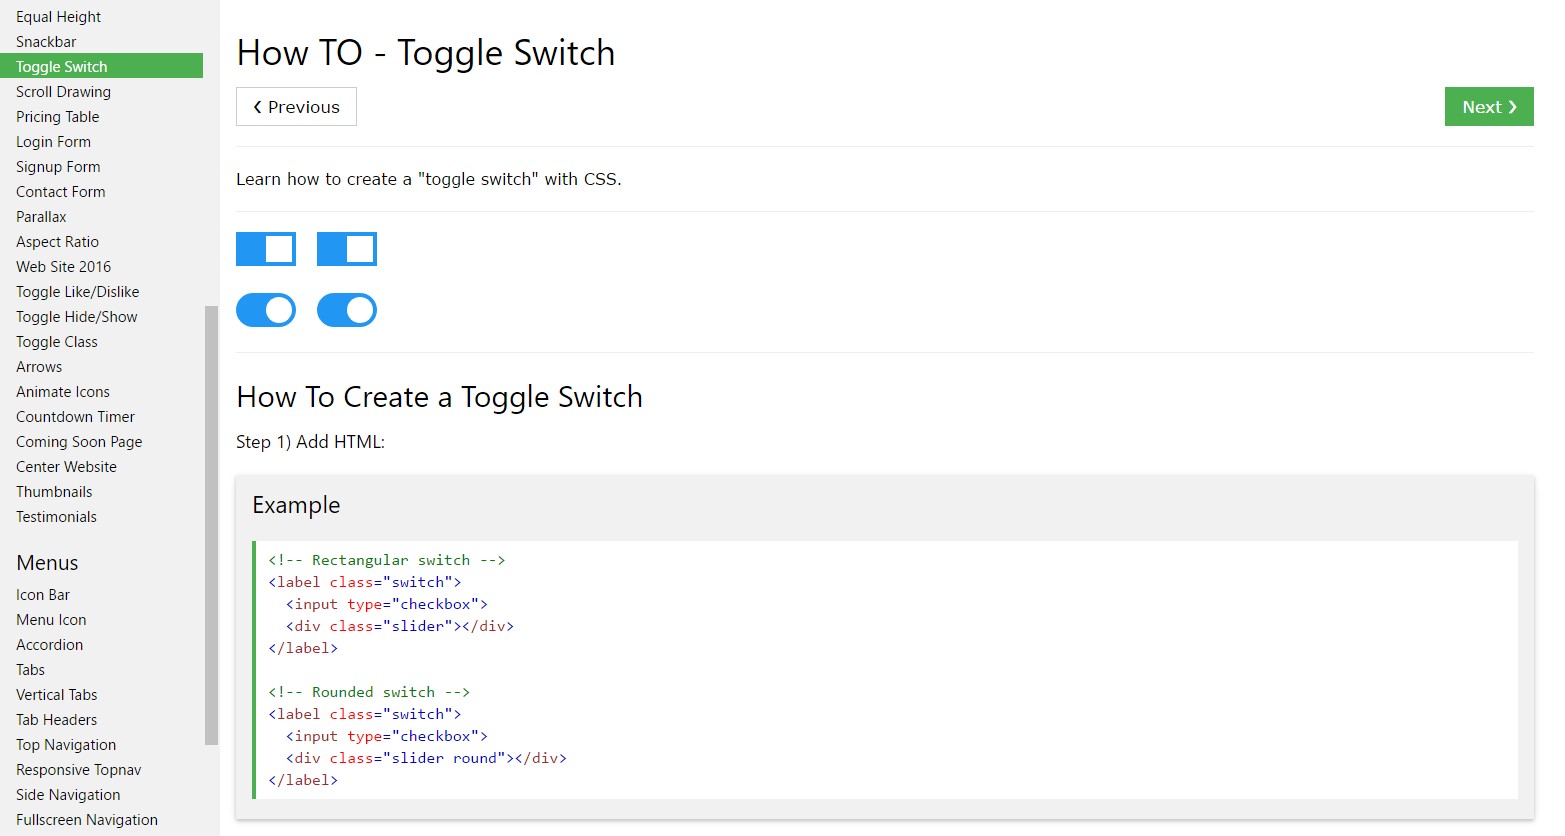  Tips on how to  provide Toggle Switch